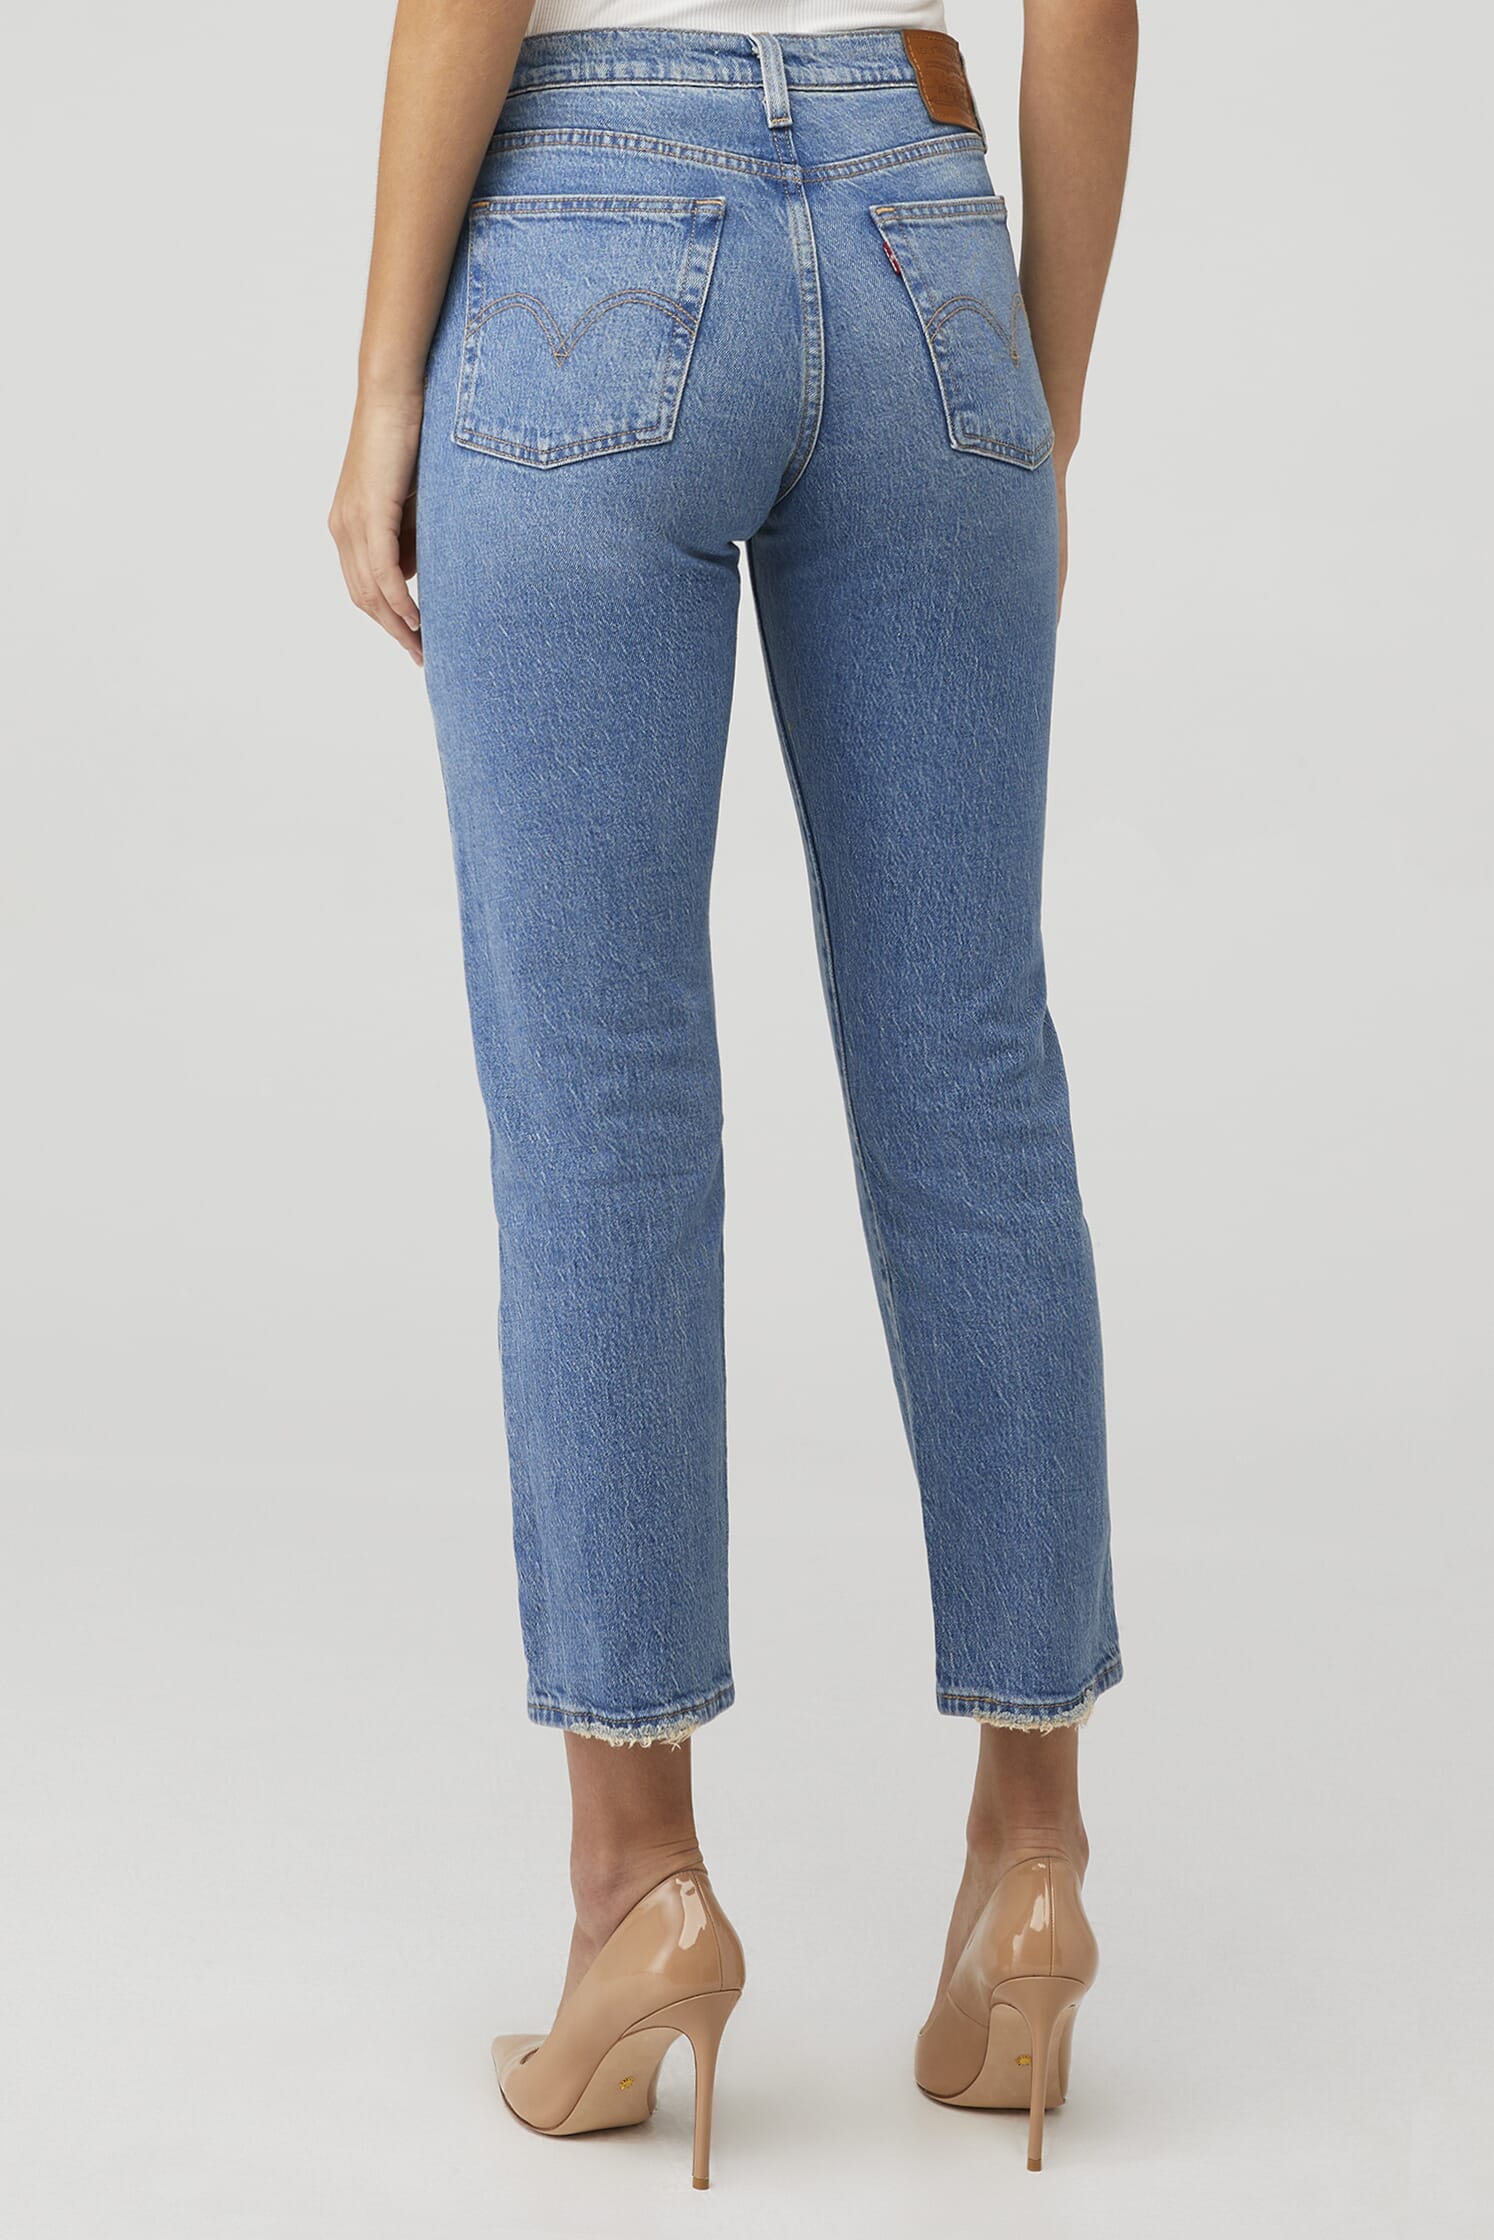 Levi's - Wedgie Fit Straight Jeans in Christina (Blue) – gravitypope